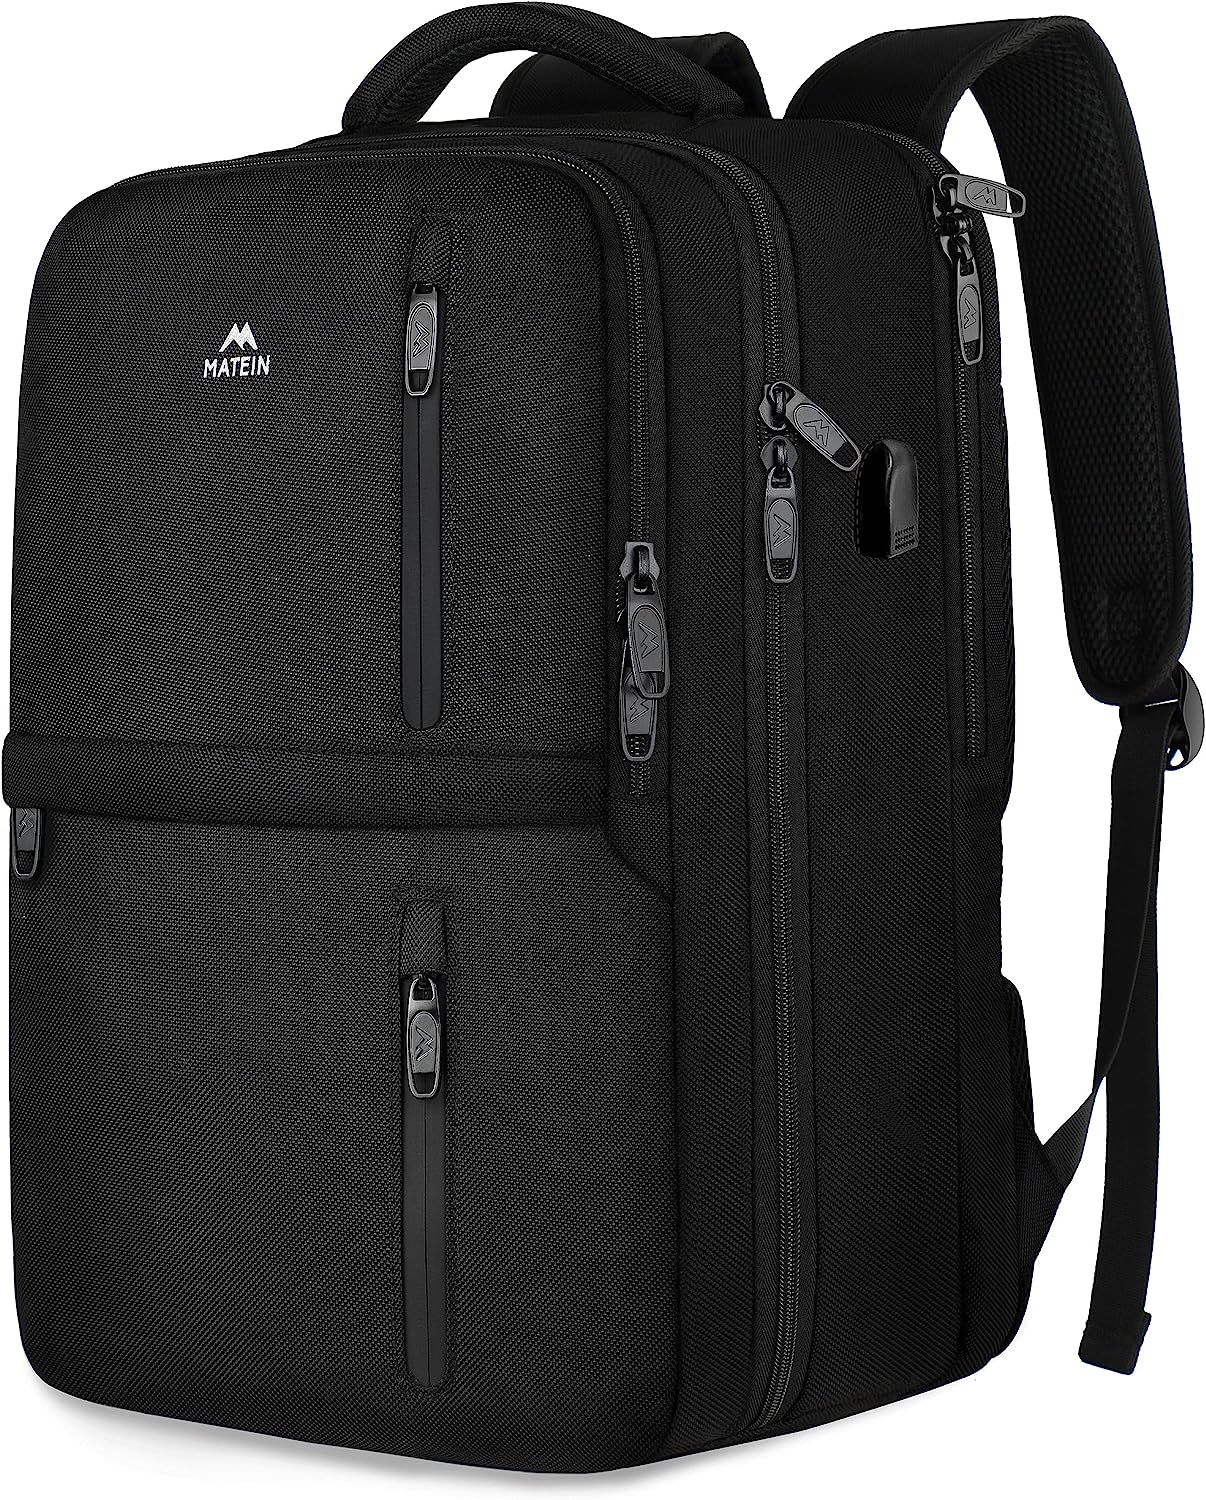 MATEIN Carry on Backpack, 40L Flight Approved Large [...]